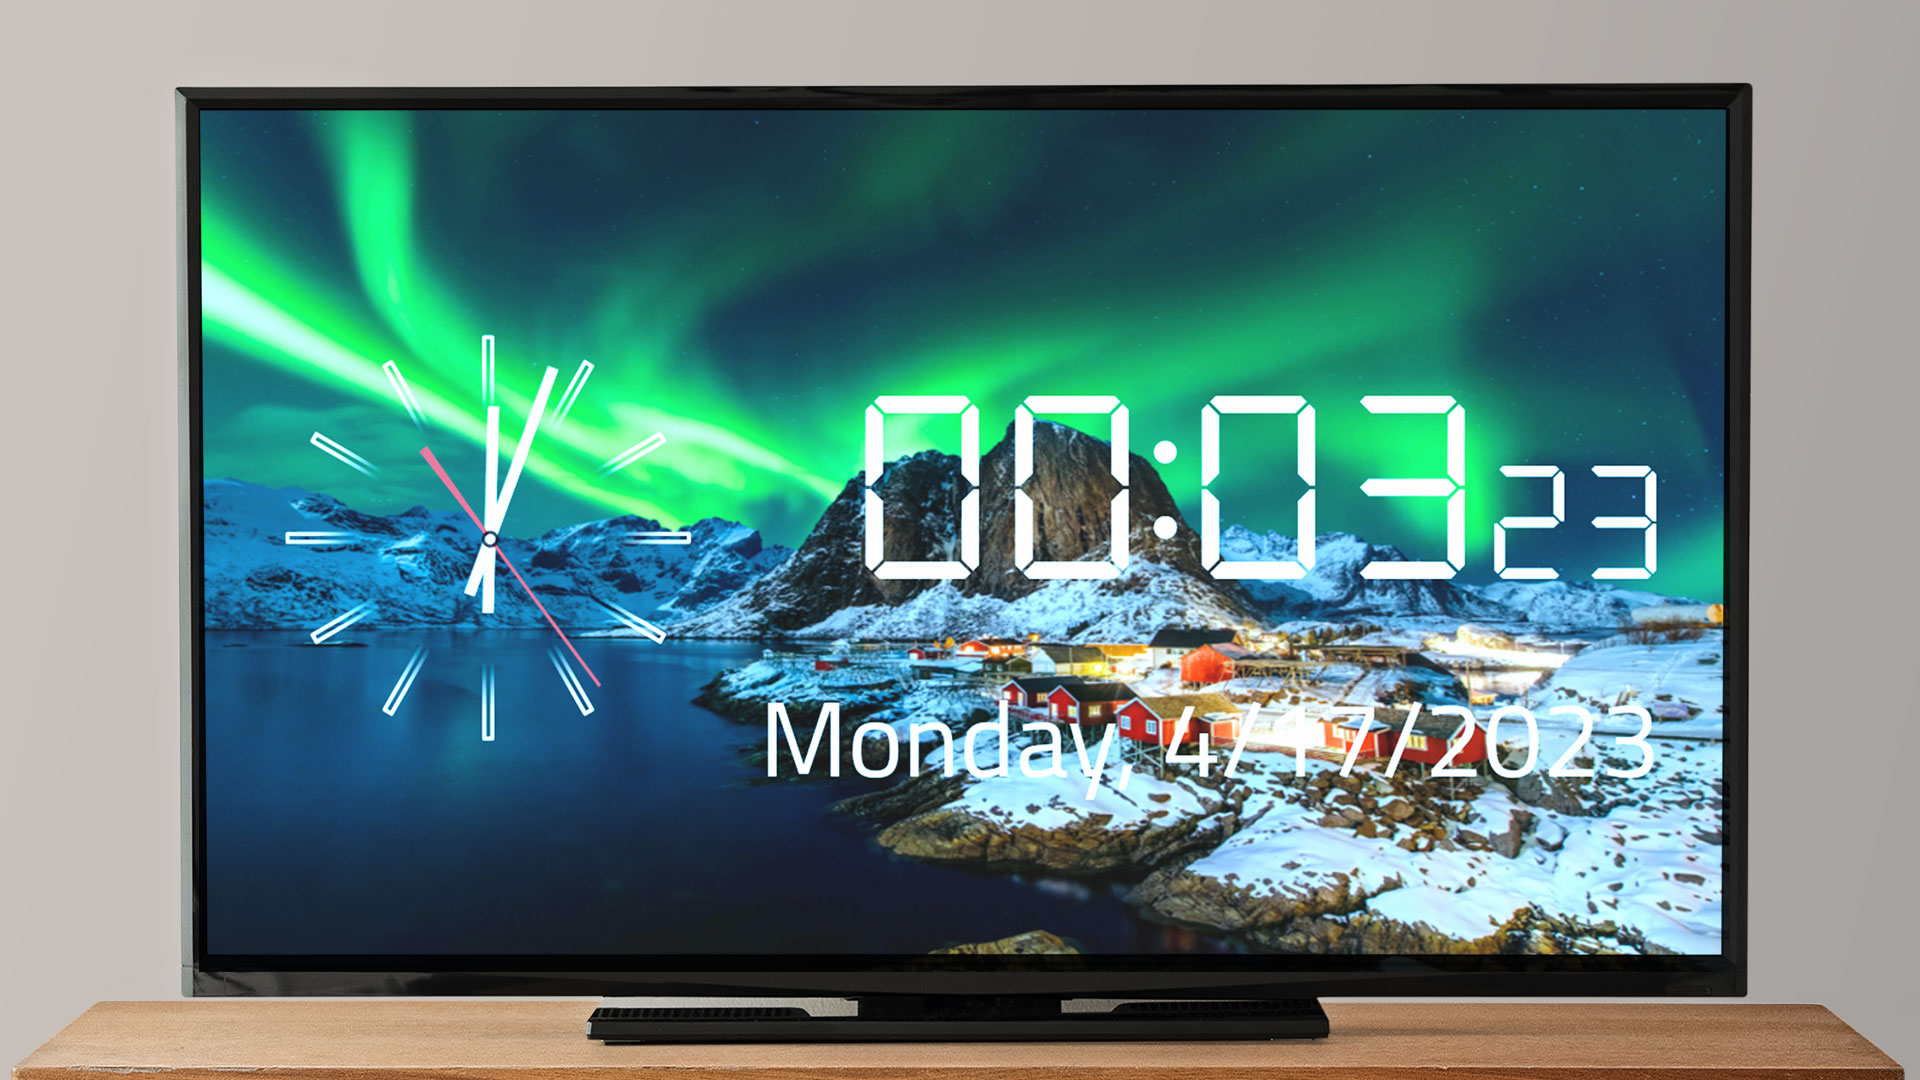 Northern Lights Timepiece: Analog and Digital Clock Screensaver for Fire TV and Tablet - NO ADS